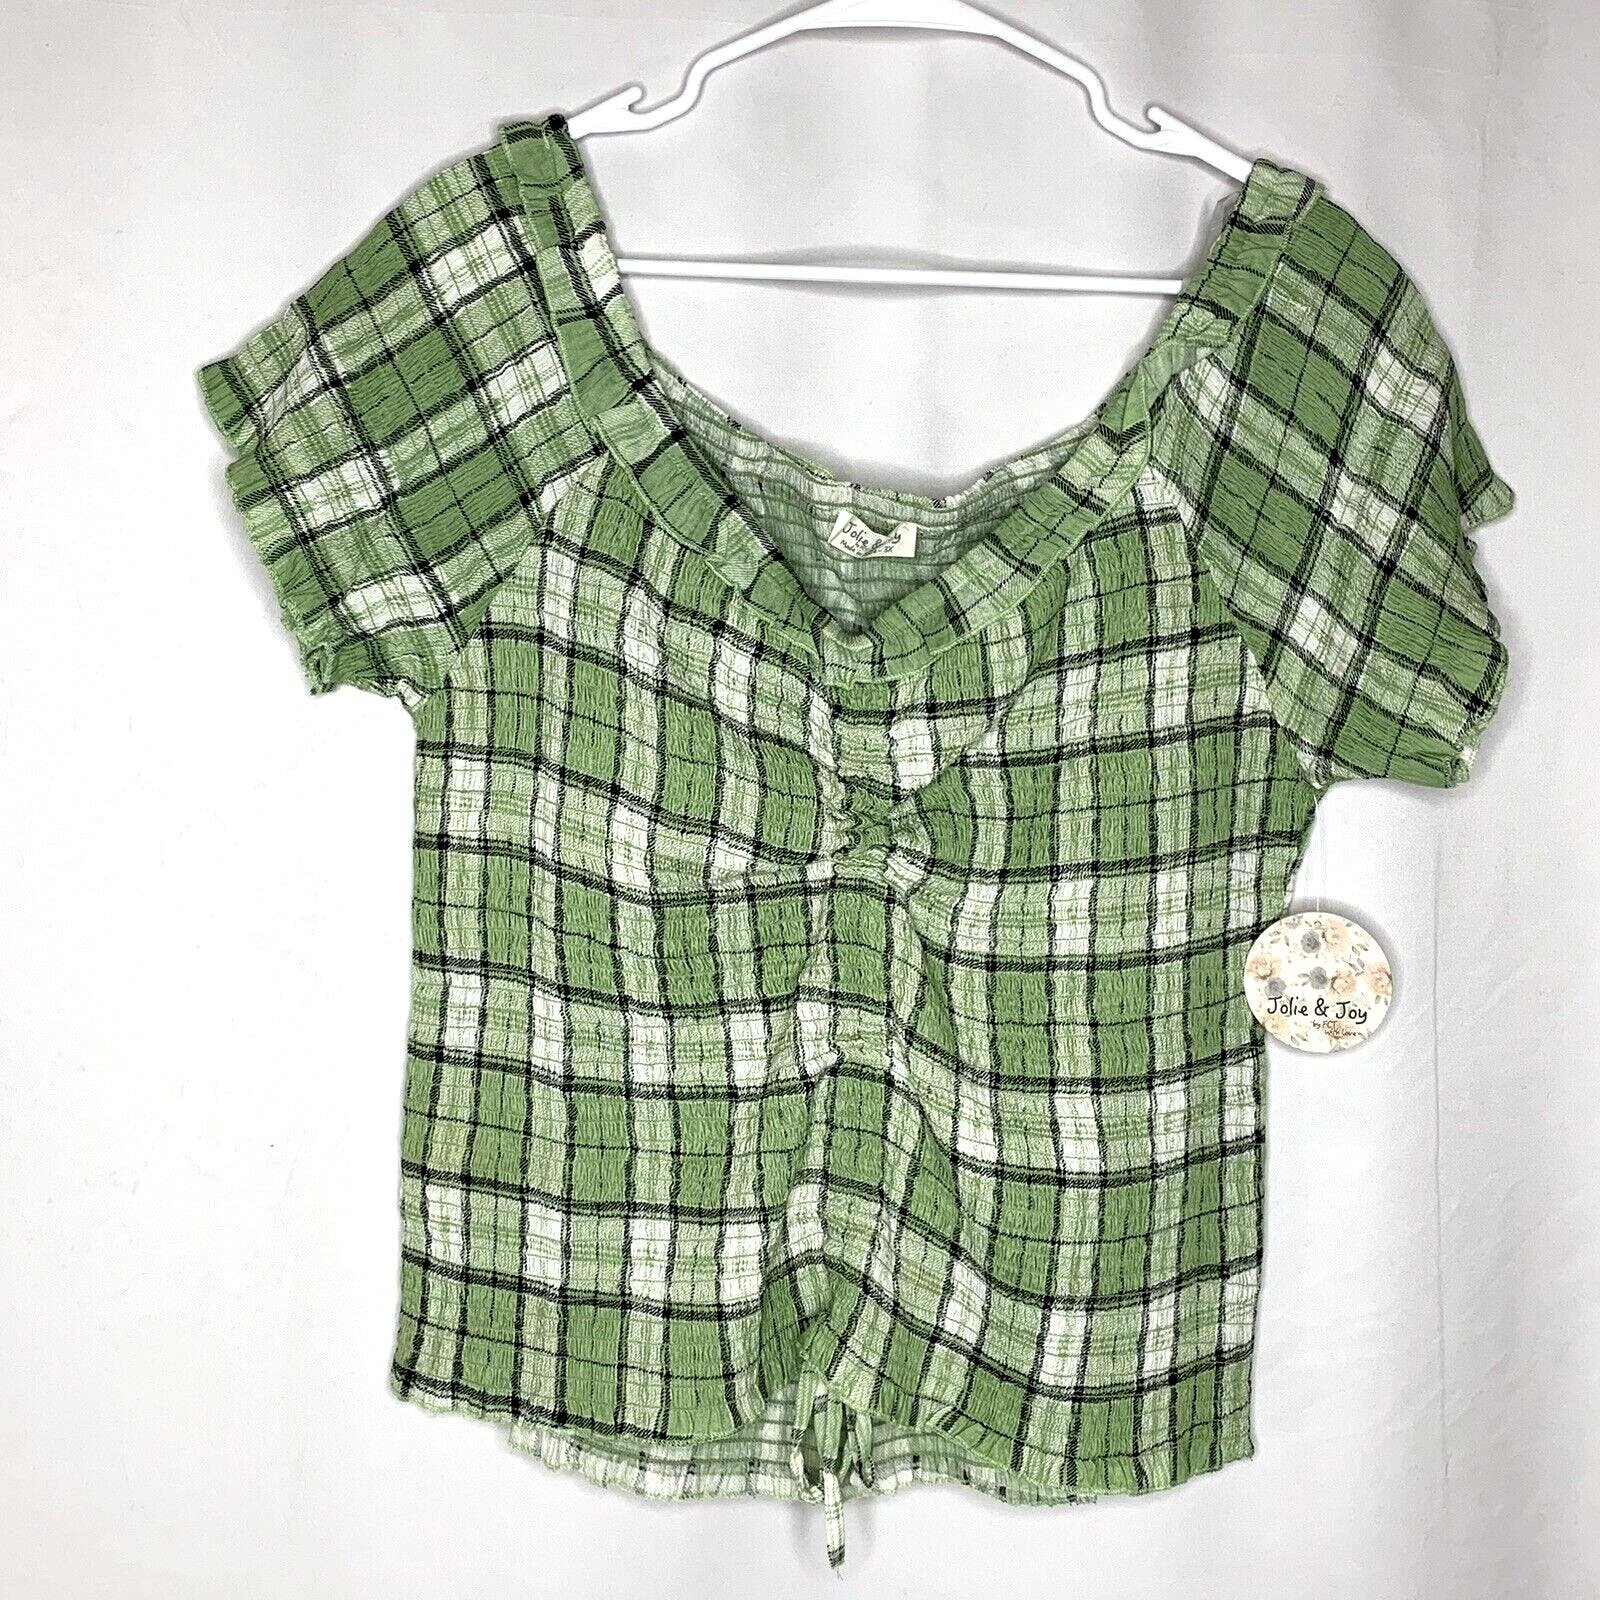 large selection Jolie And Joy Womens Top Shirt Size 3X Green Plaid Allover Stretch FV2AoxSTc on sale